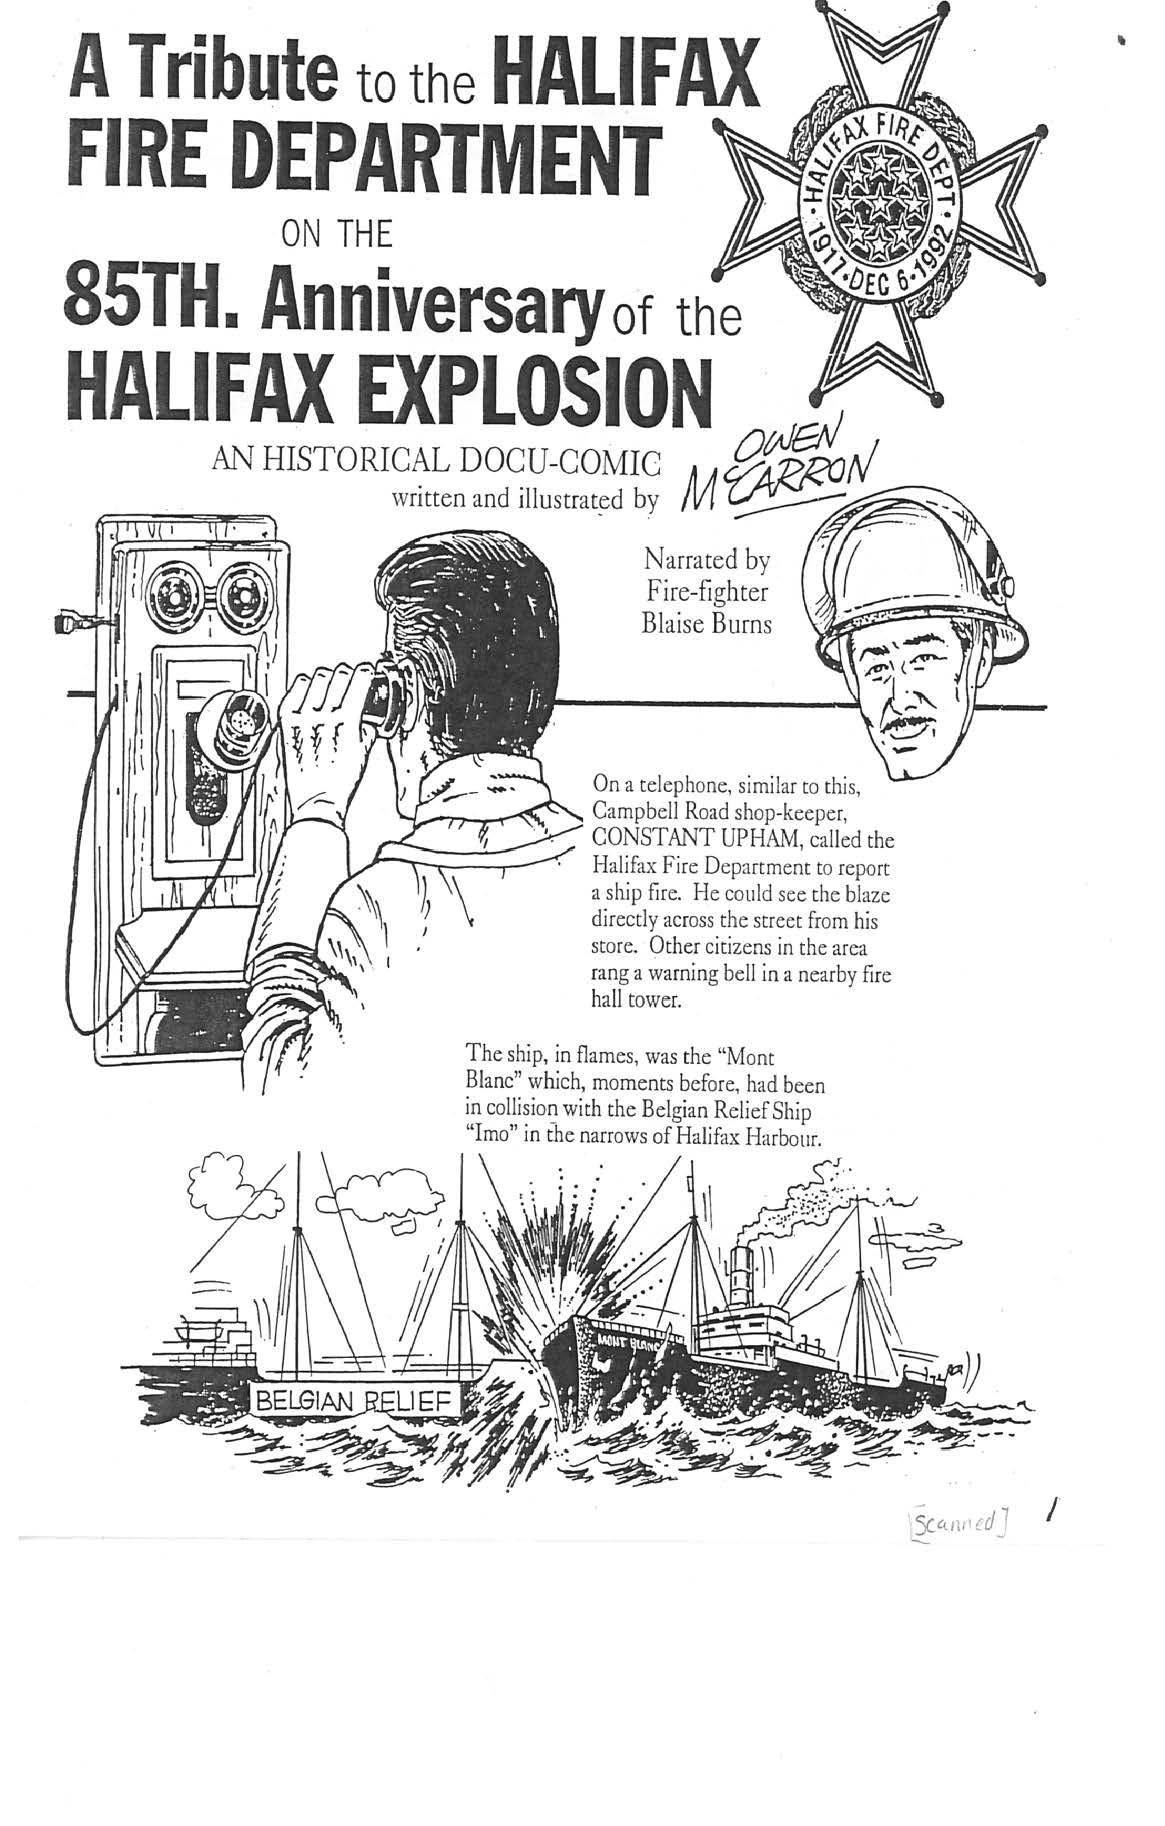 A Tribute to the Halifax Fire Department on the 85th Anniversary of the Halifax Explosion